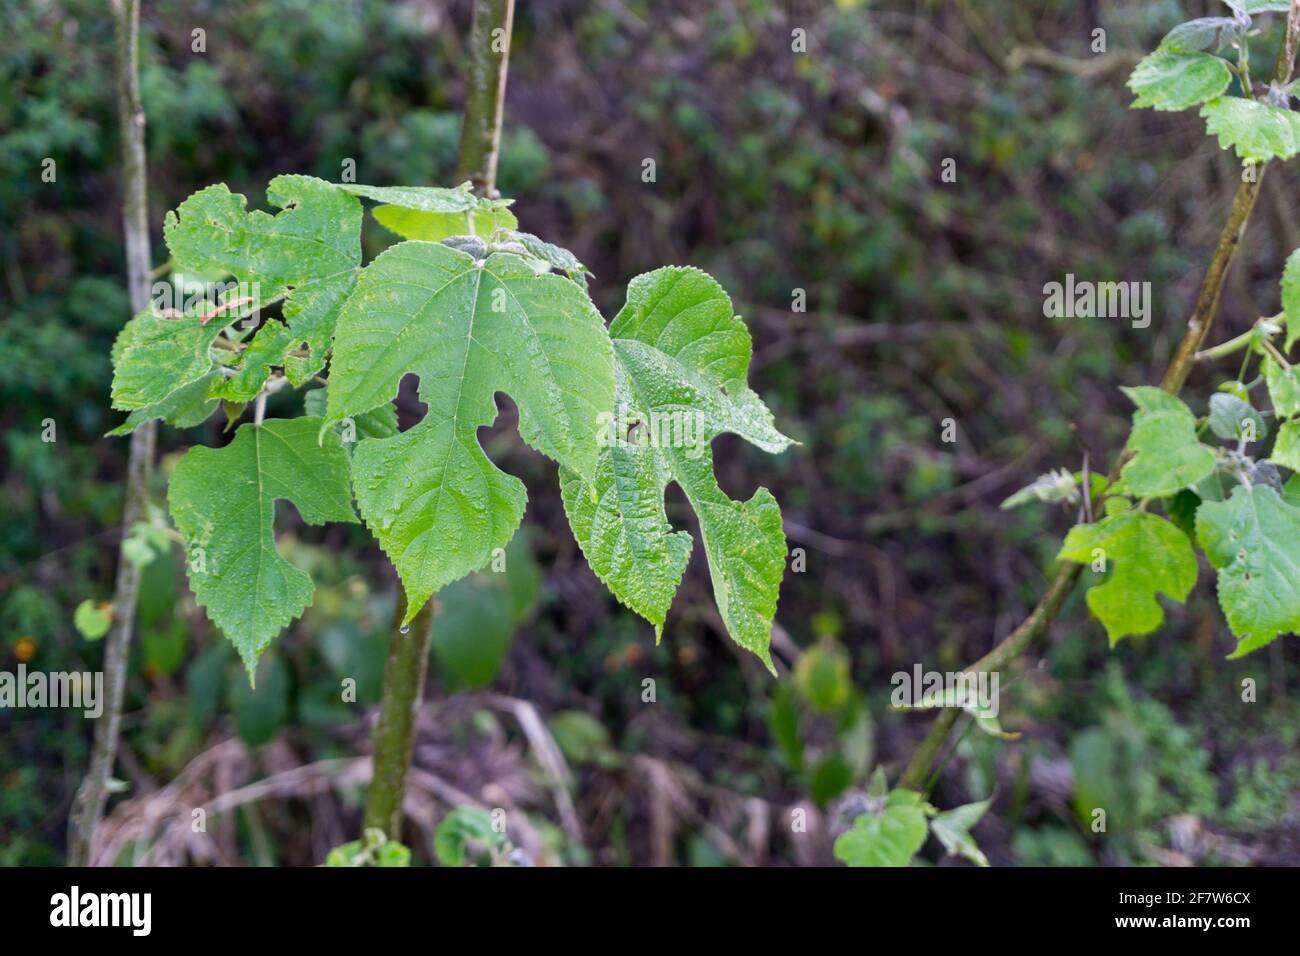 Leaves of Ampelopsis glandulosa var. brevipedunculata, with common names creeper, porcelain berry, Amur peppervine, and wild grape, is an ornamental p Stock Photo